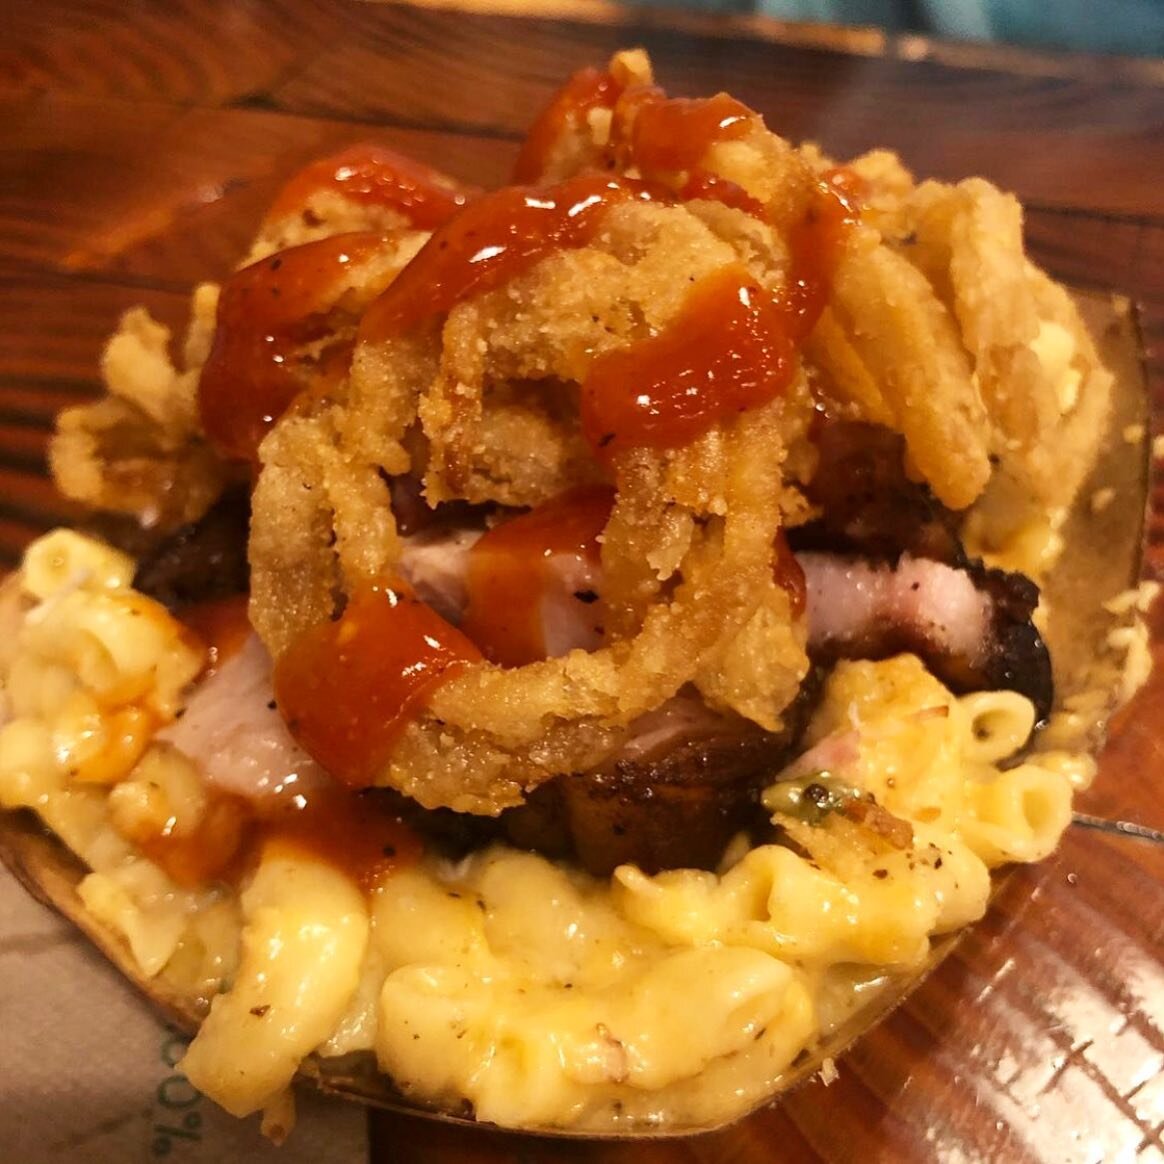 Feast your 👀 on your lunch &mdash; our Pork Belly Dirty Mac! Our signature Jalapeno-Bacon Mac &amp; Cheese is layered with Smoked Pork Belly and topped with crispy onions and our house bbq sauce.🤤 &thinsp;
&thinsp;
📸: @kaylaeatsfood &thinsp;
&thin